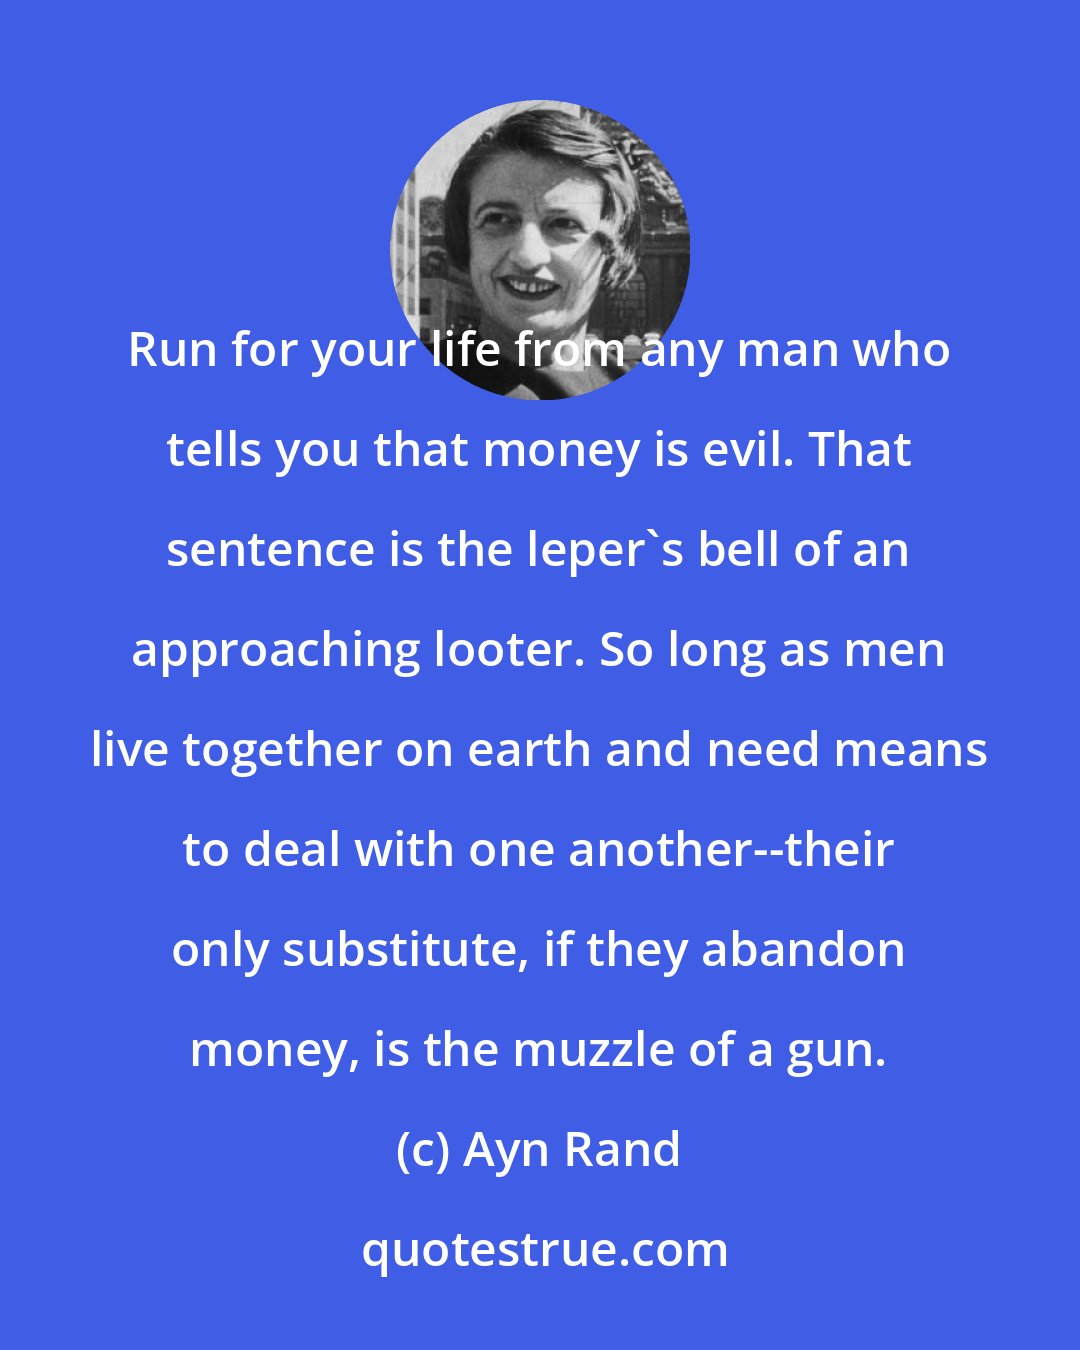 Ayn Rand: Run for your life from any man who tells you that money is evil. That sentence is the leper's bell of an approaching looter. So long as men live together on earth and need means to deal with one another--their only substitute, if they abandon money, is the muzzle of a gun.